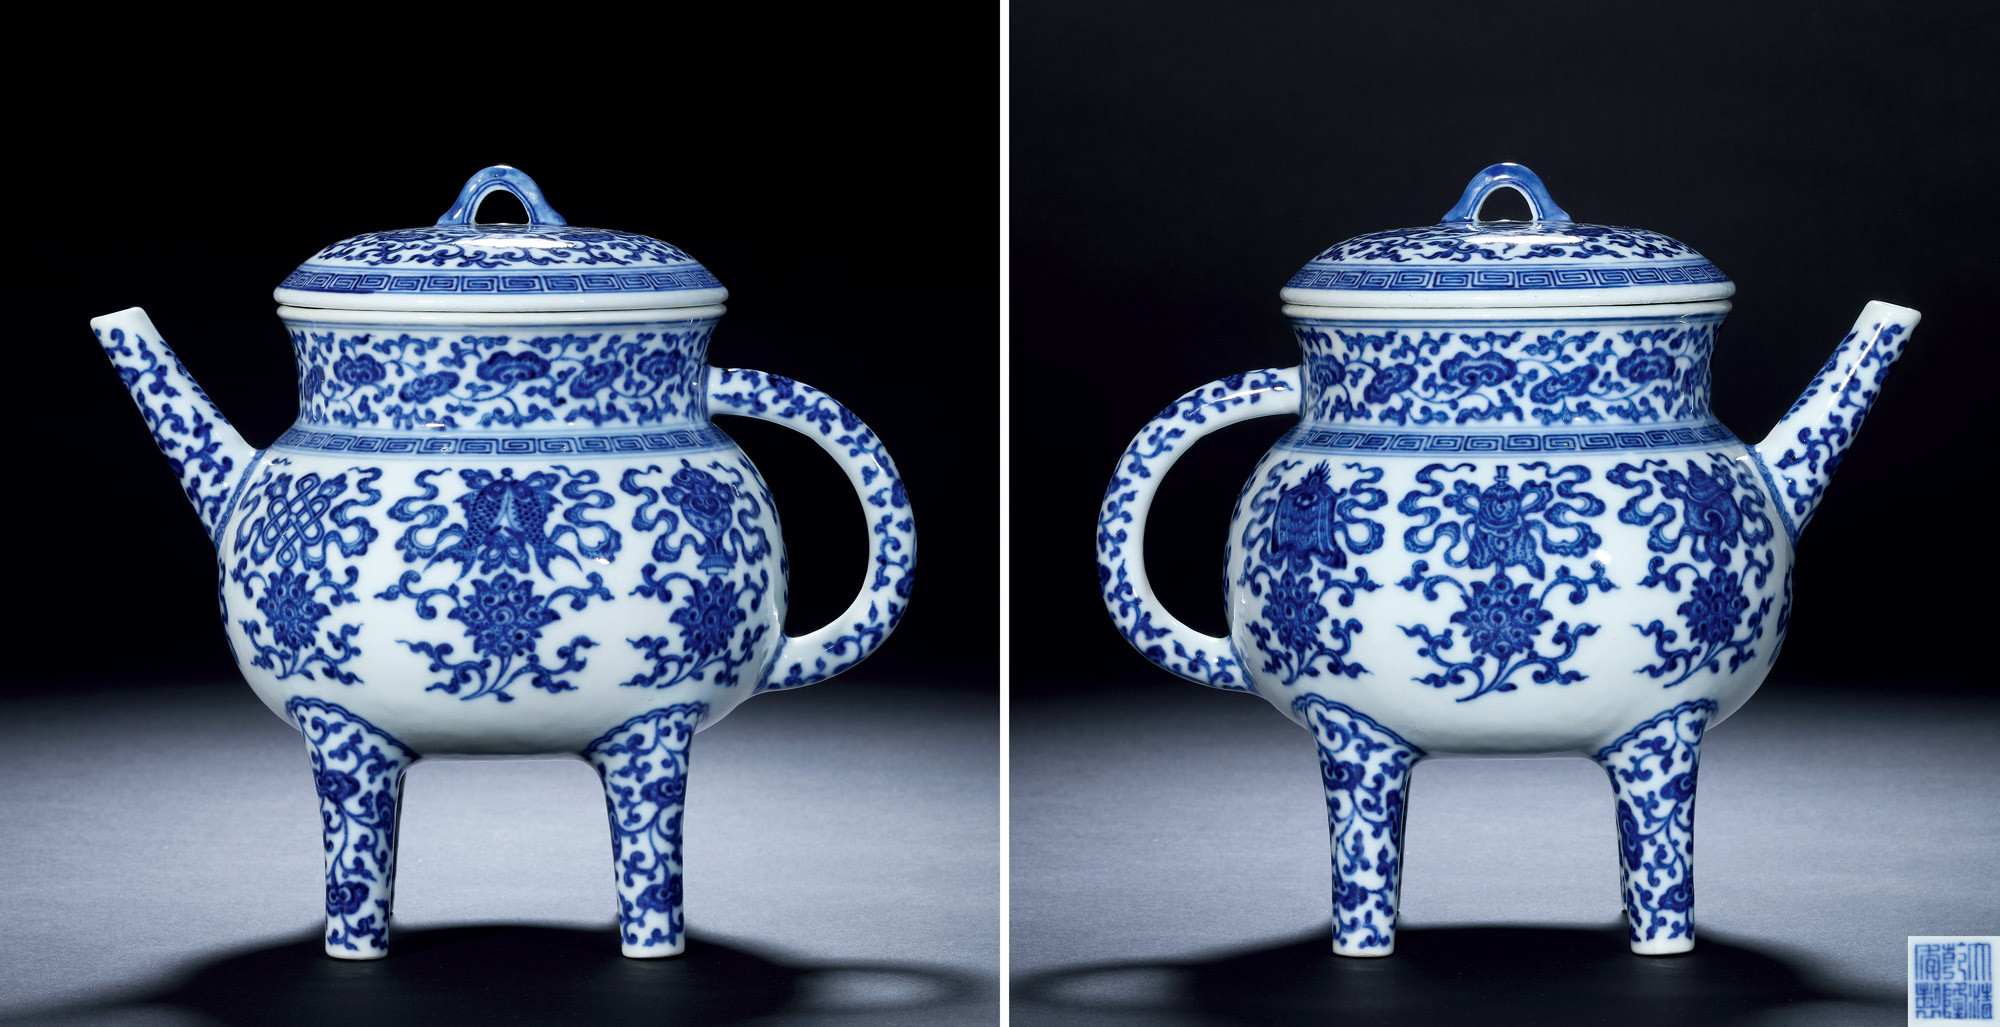 A RARE BLUE AND WHITE“BAJIXIANG AND LOTUS” POT VASSEL